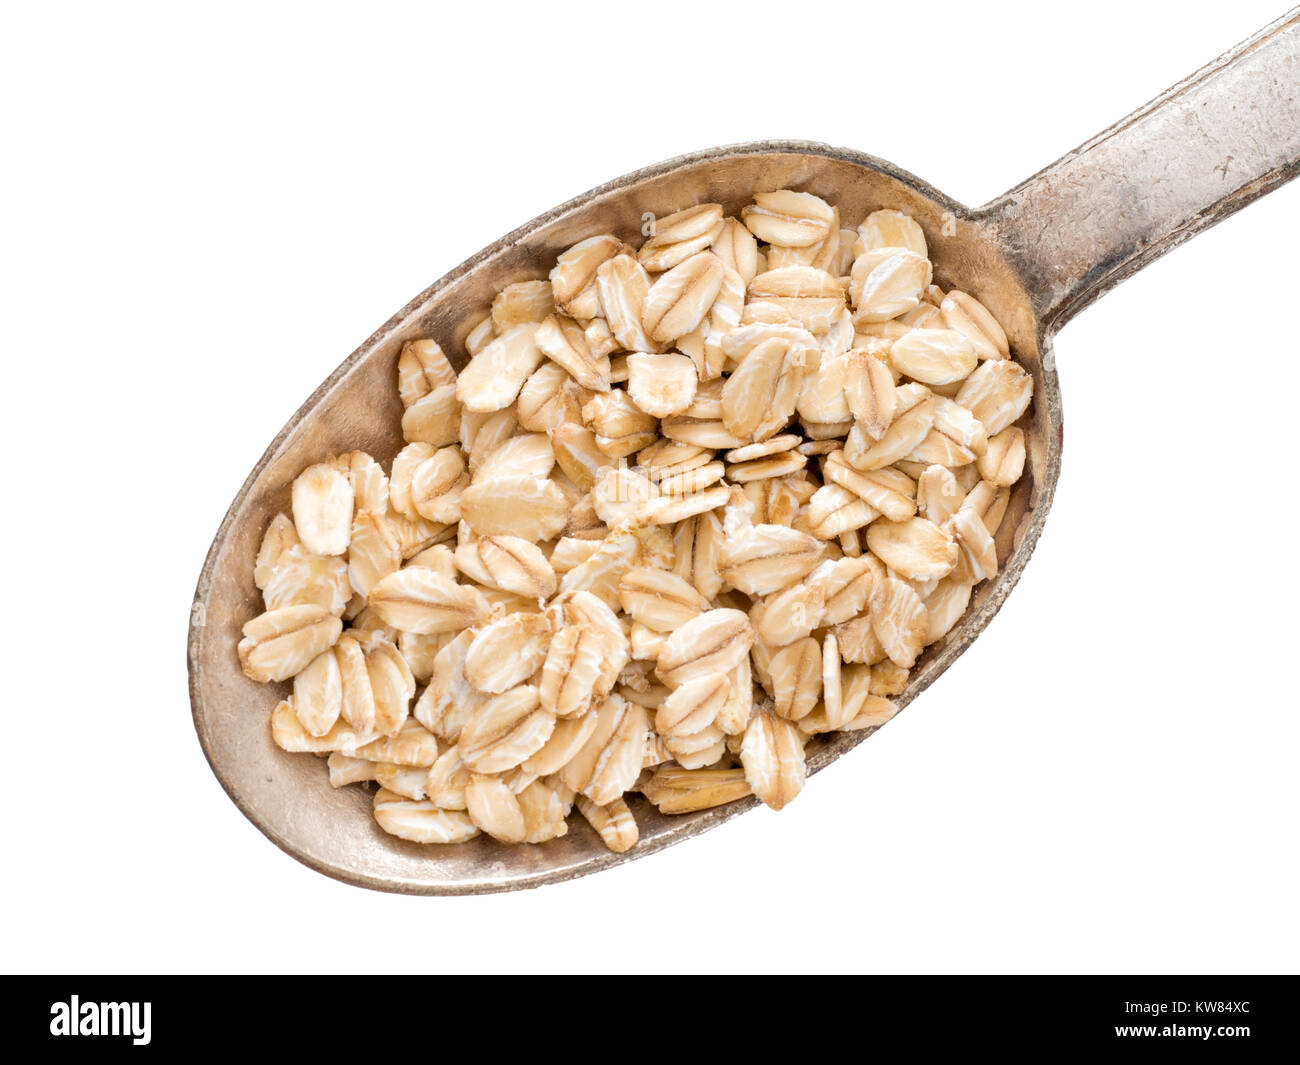 Spoon of organic whole grain oats, coarsely ground. Isolated on white. Stock Photo